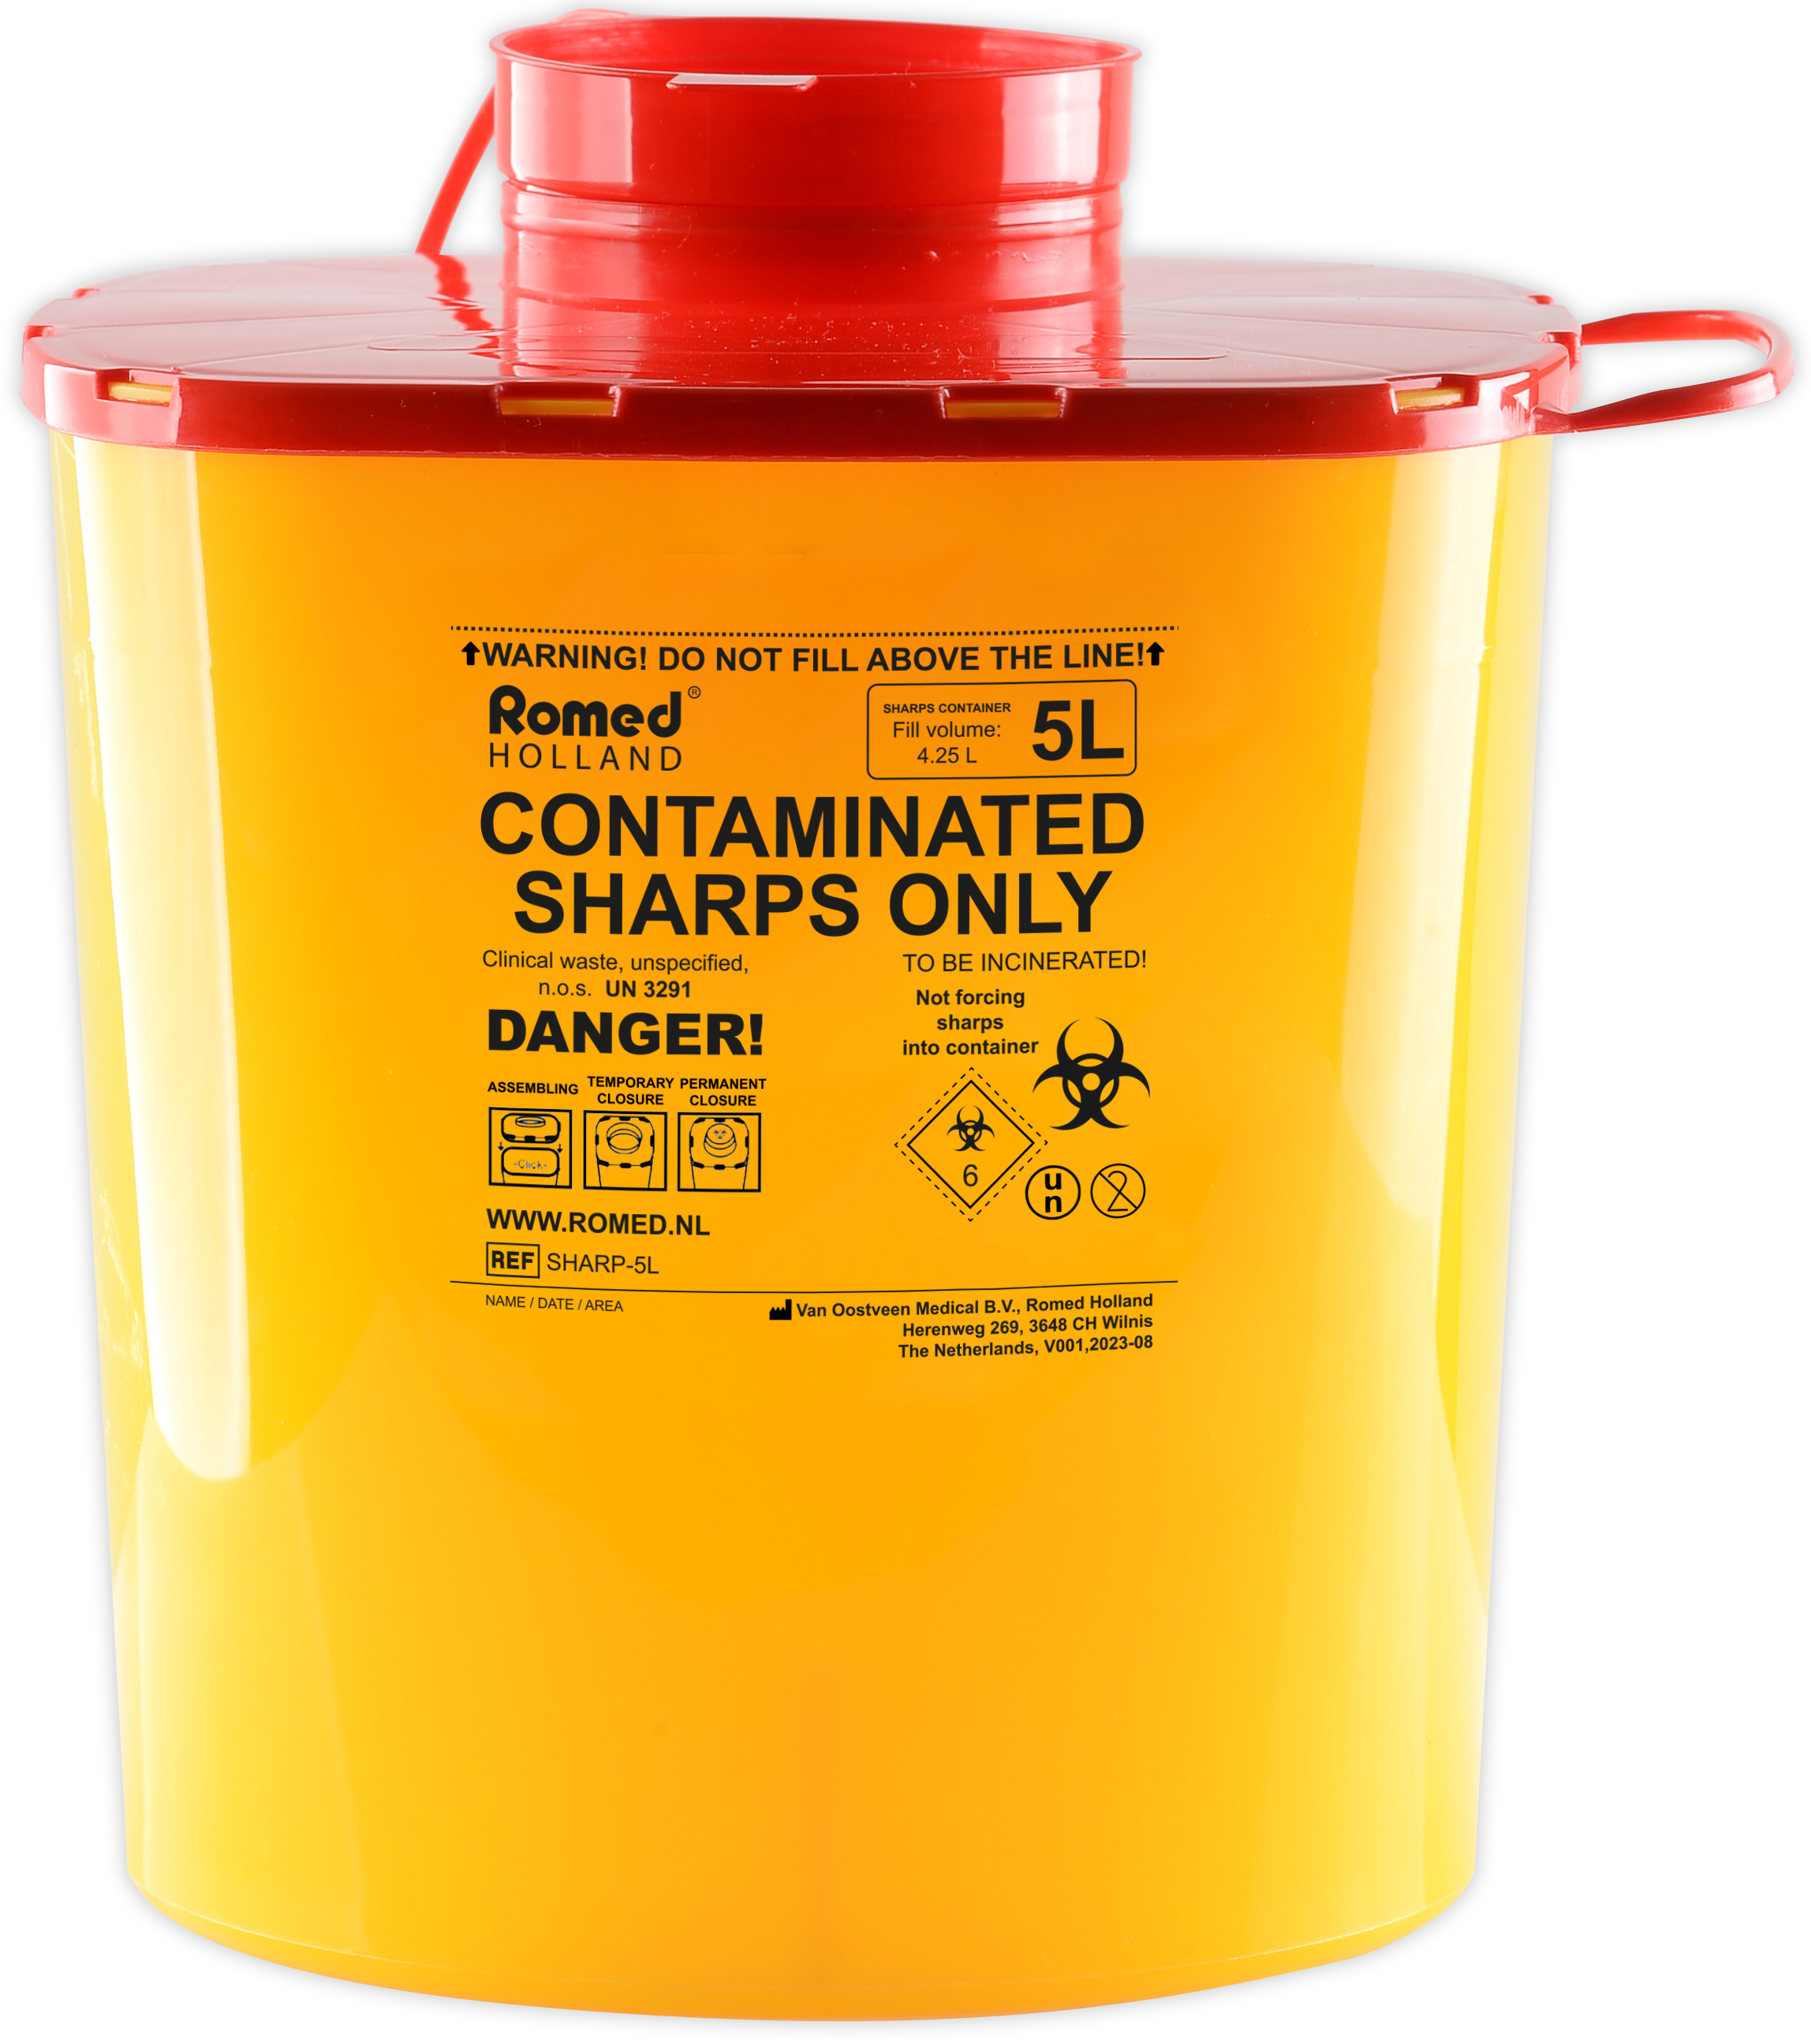 SHARP-5L Romed Sharp Container, for clinical waste, 5 liter, 27 pcs in a carton.